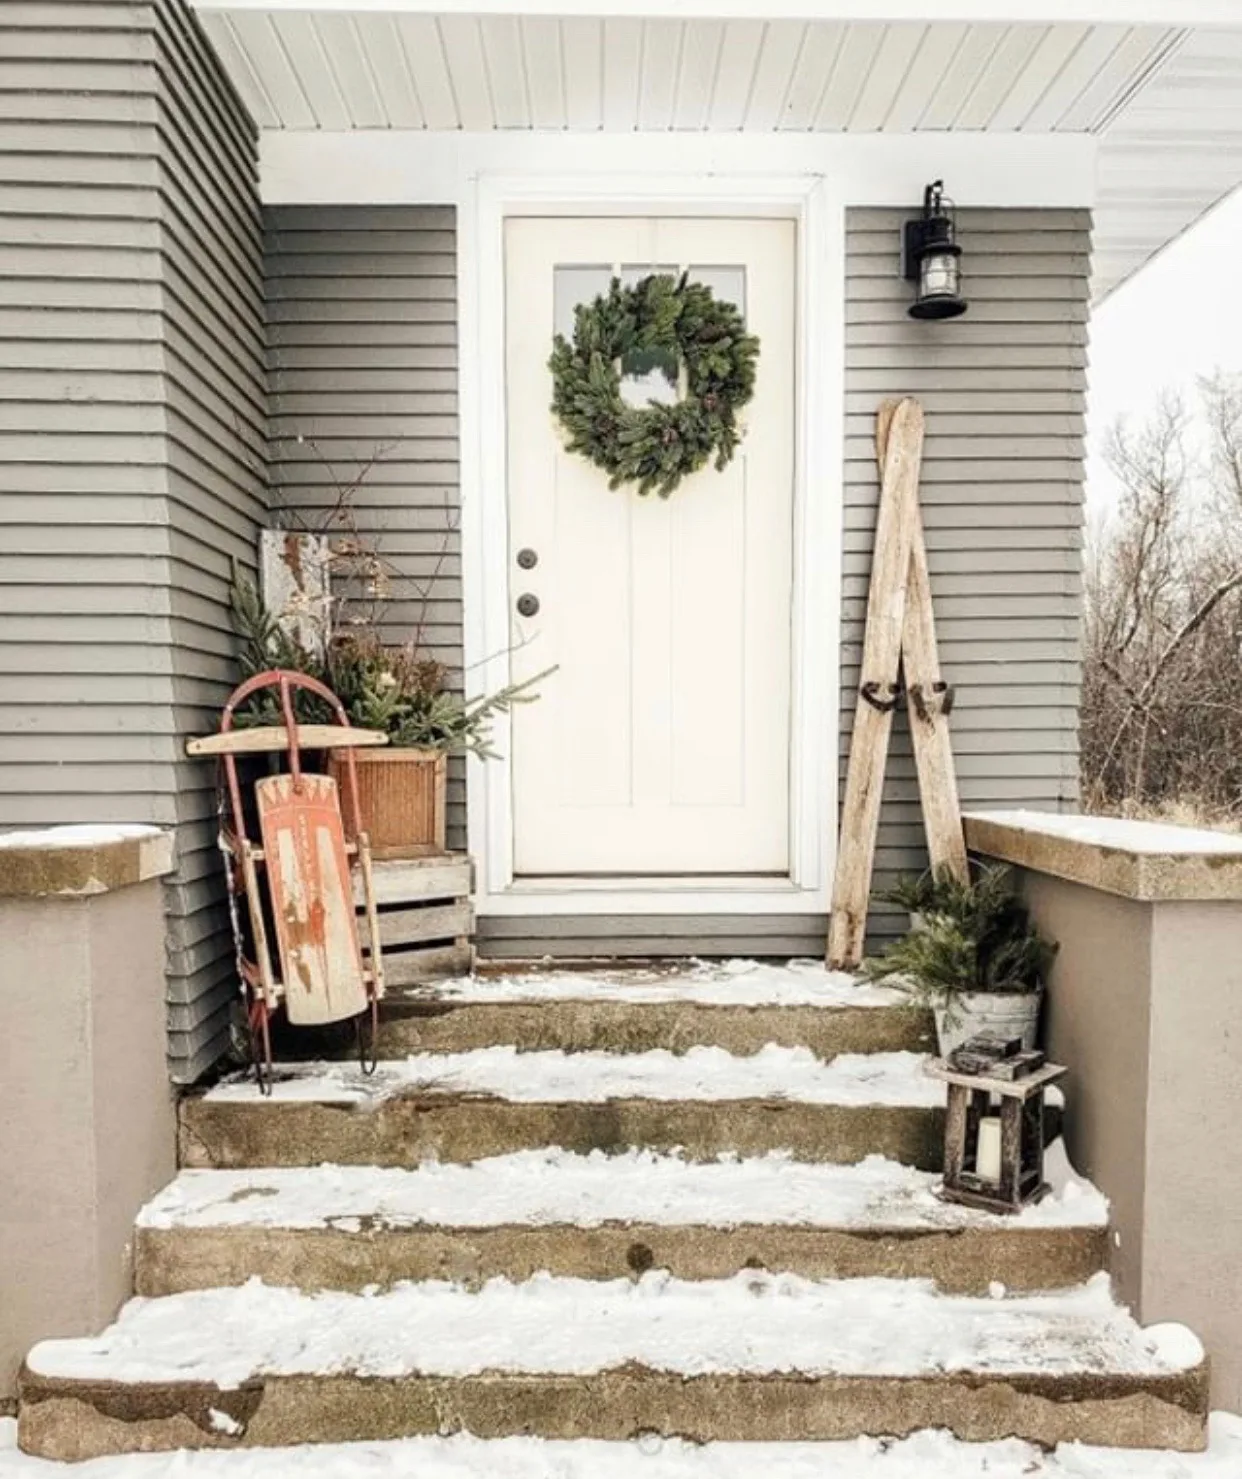 Christmas decorating ideas for porches by Farmhouse for 8 with a sled, skies and greenery and a lantern